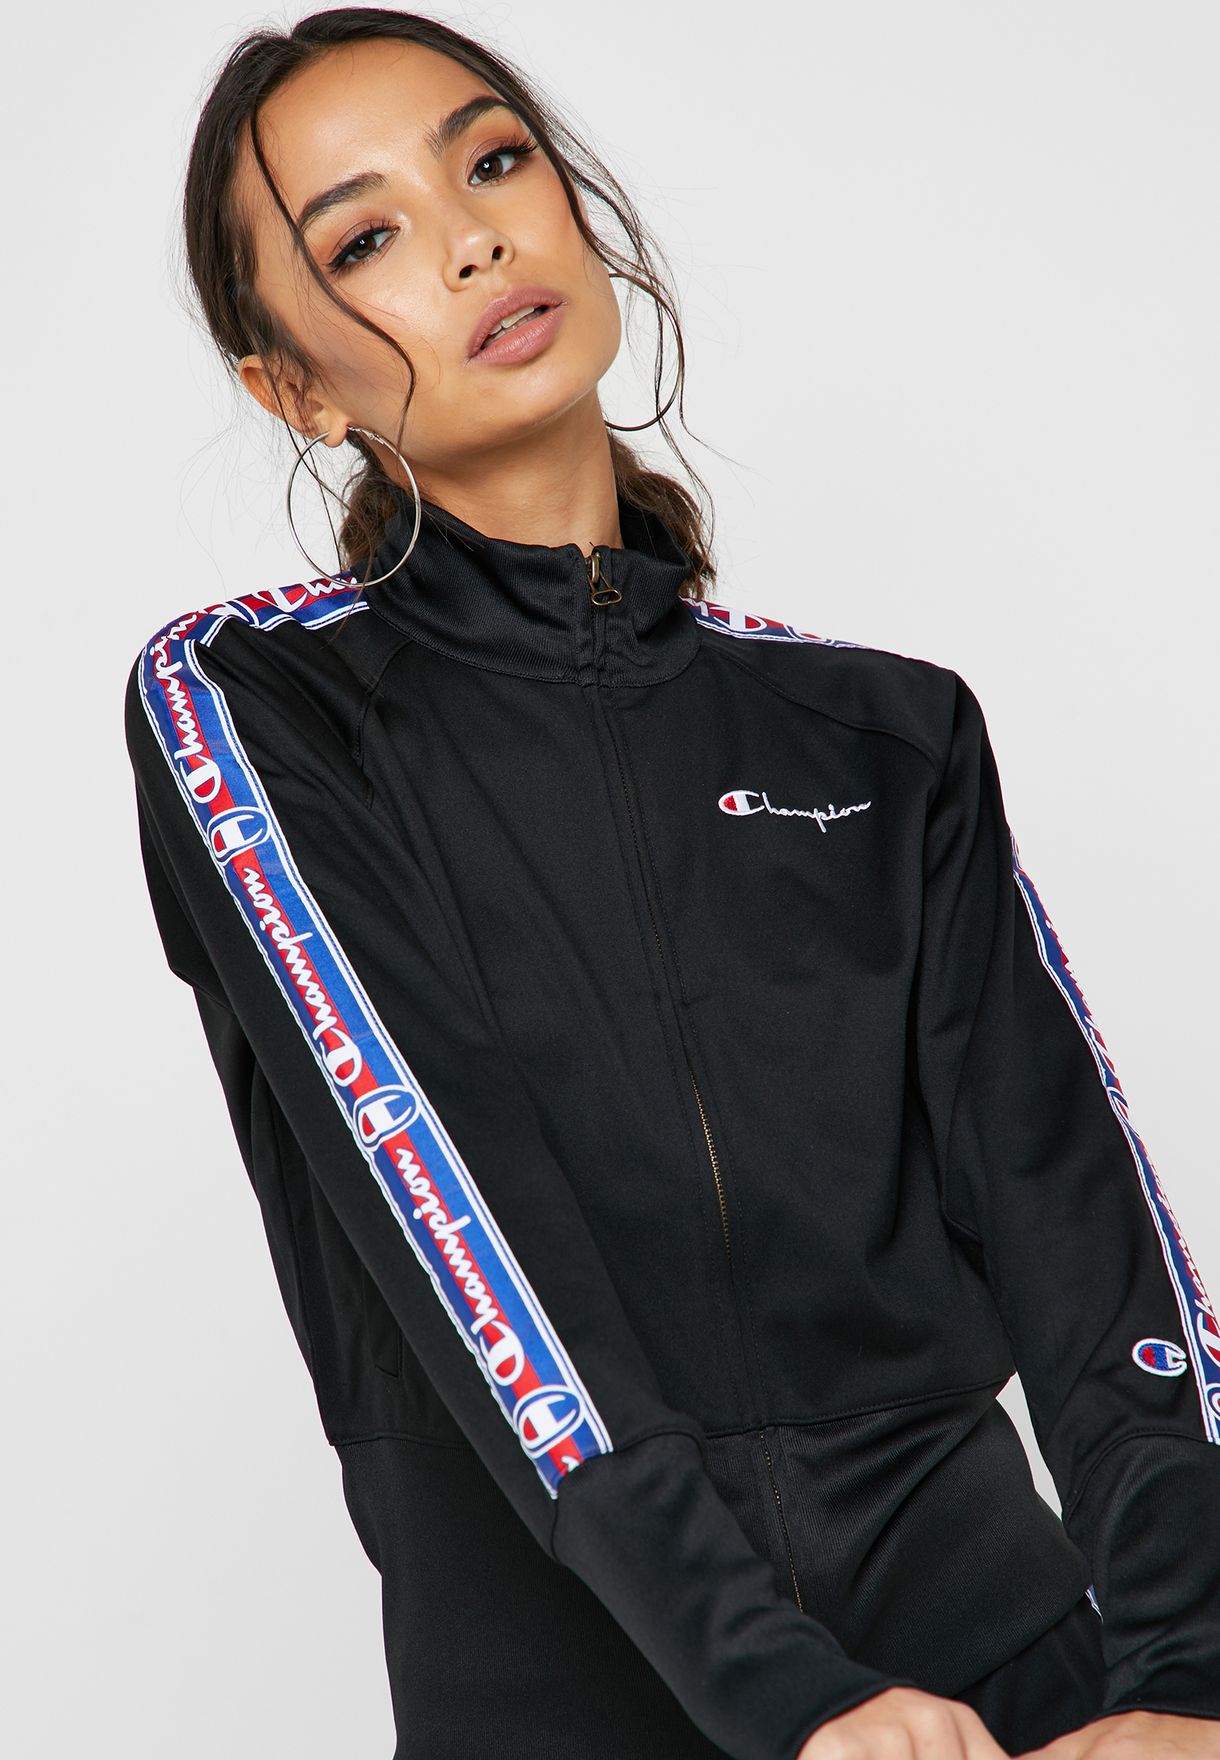 Track Jacket Champion Top Sellers, 56% OFF | www.emanagreen.com